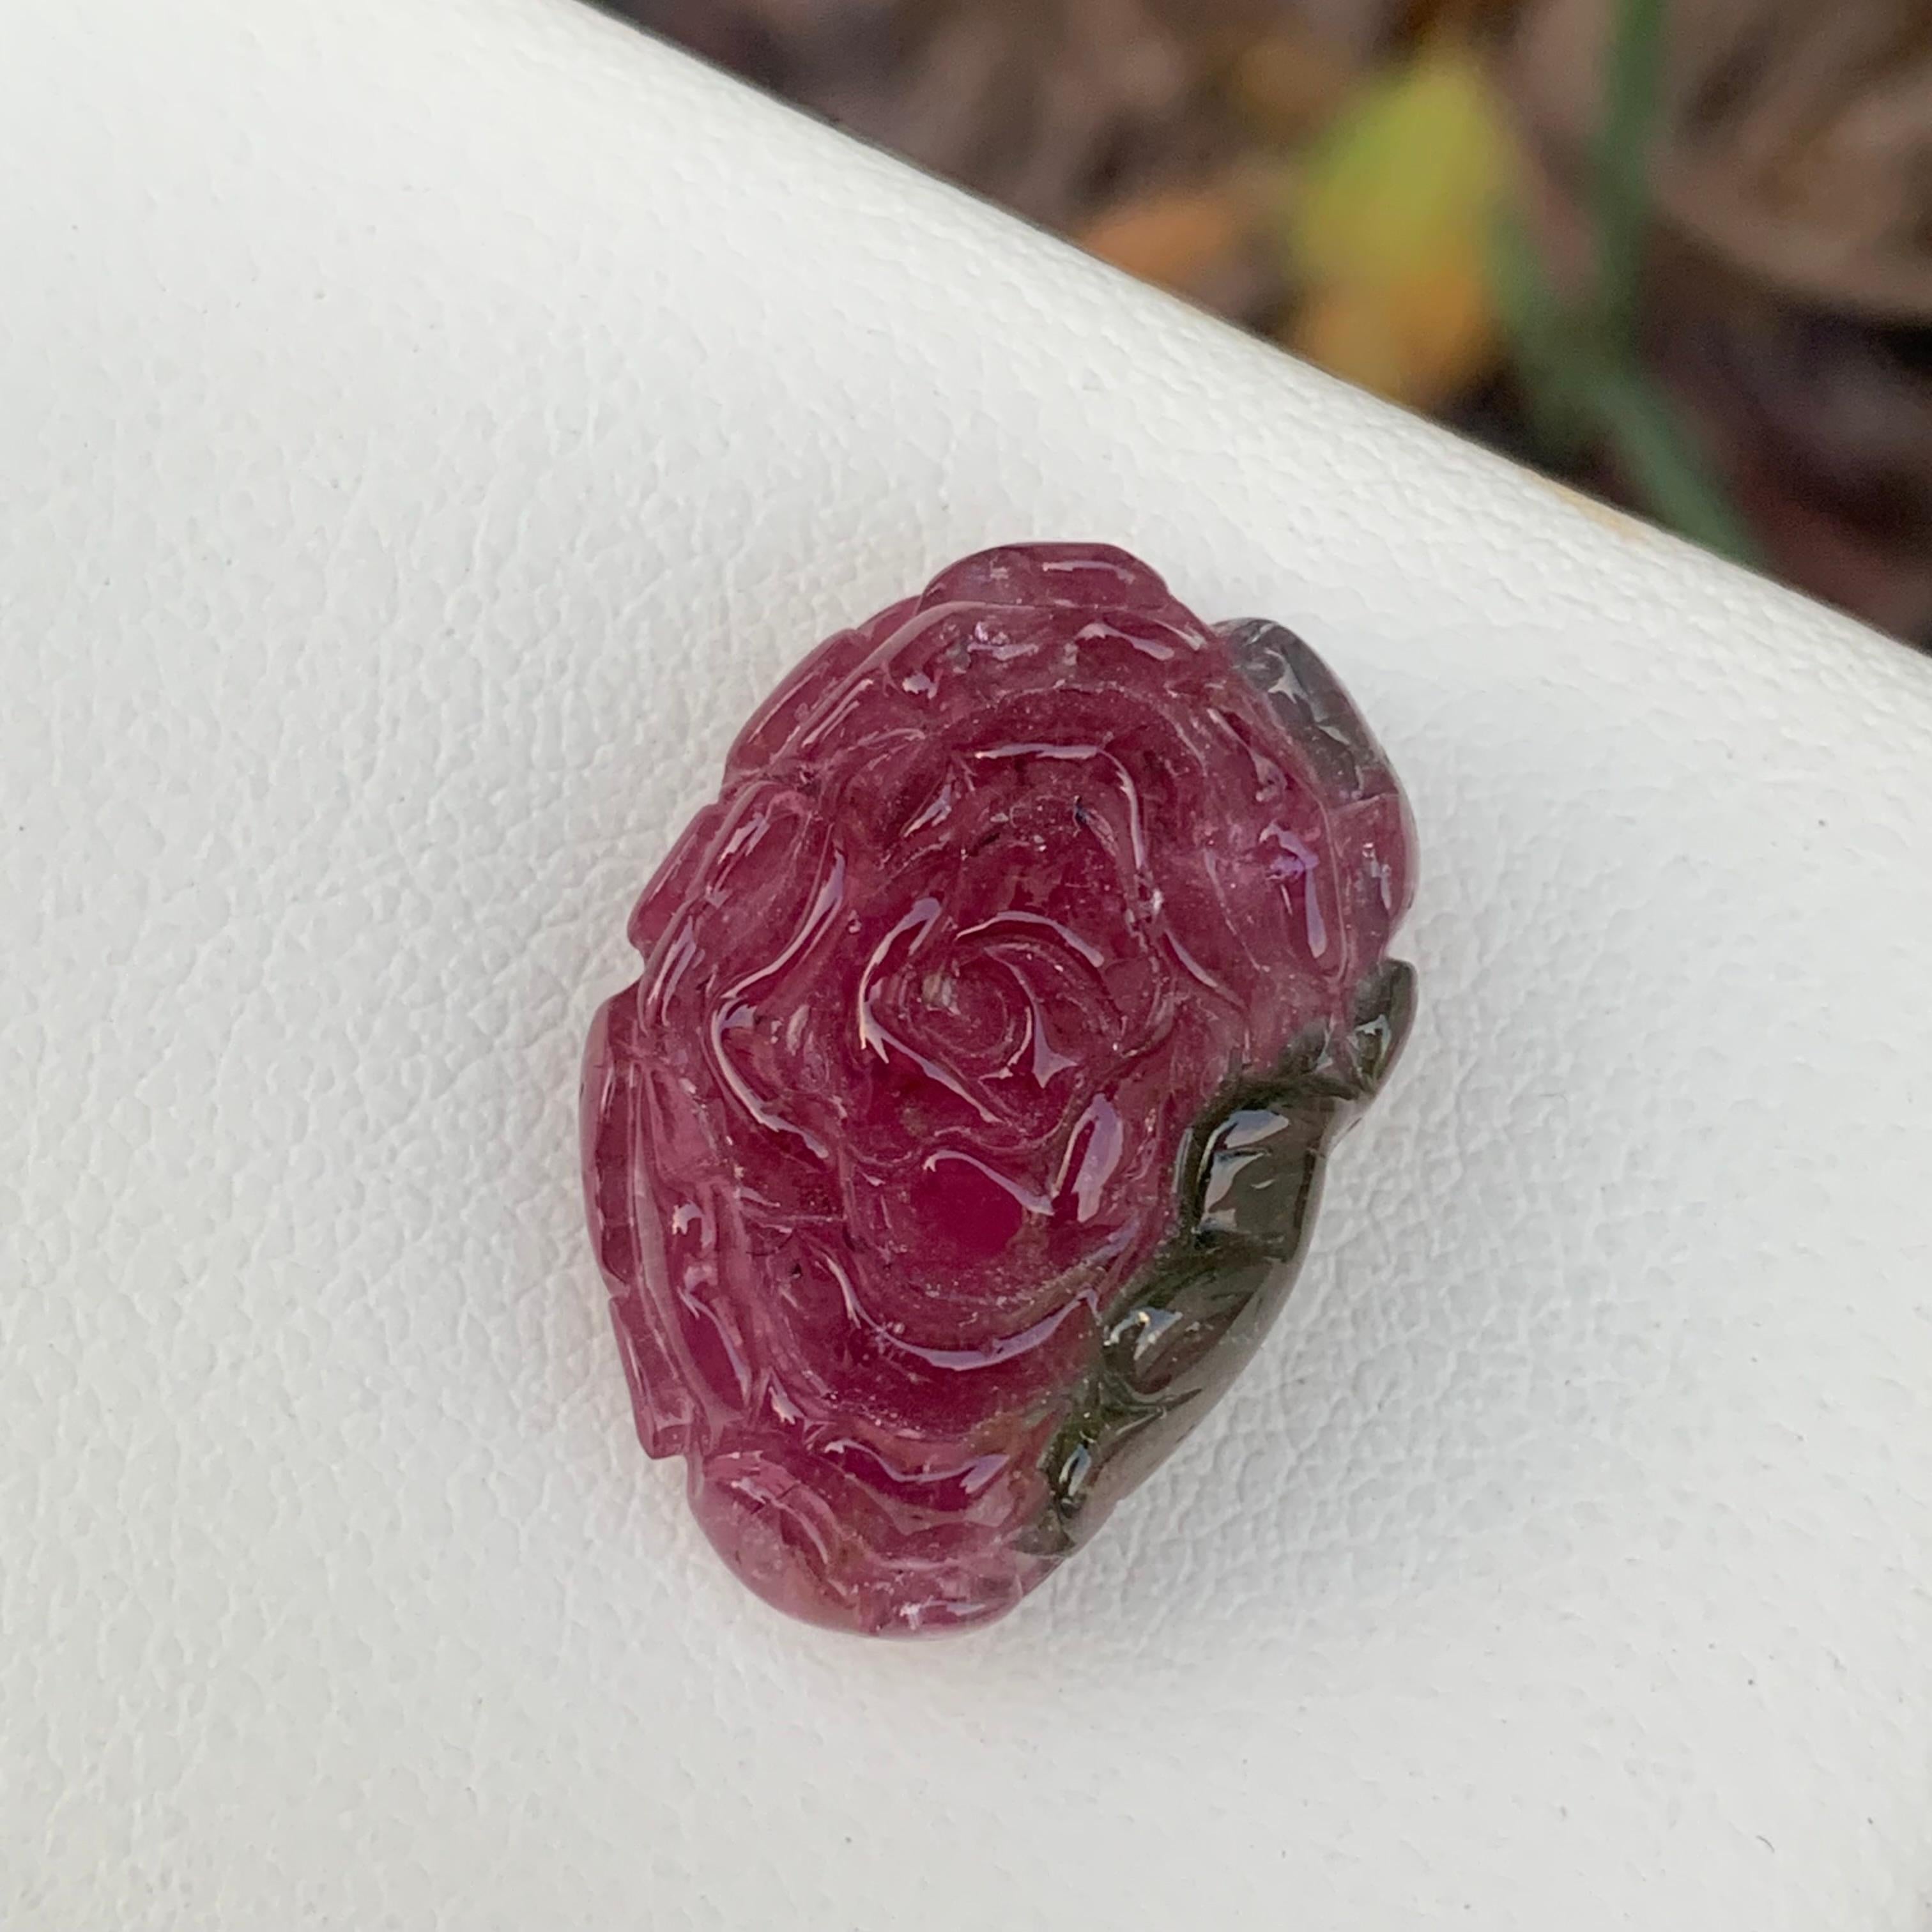 Bicolor Tourmaline Carved
Weight: 32.75 Carats
Dimension: 24x16x9 Mm
Origin: Africa
Color: Red & Green
Shape: Carving
Quality: AAA
.
Bicolor tourmaline is connected to the heart chakra, which makes it good for cleansing and removing any blockages.